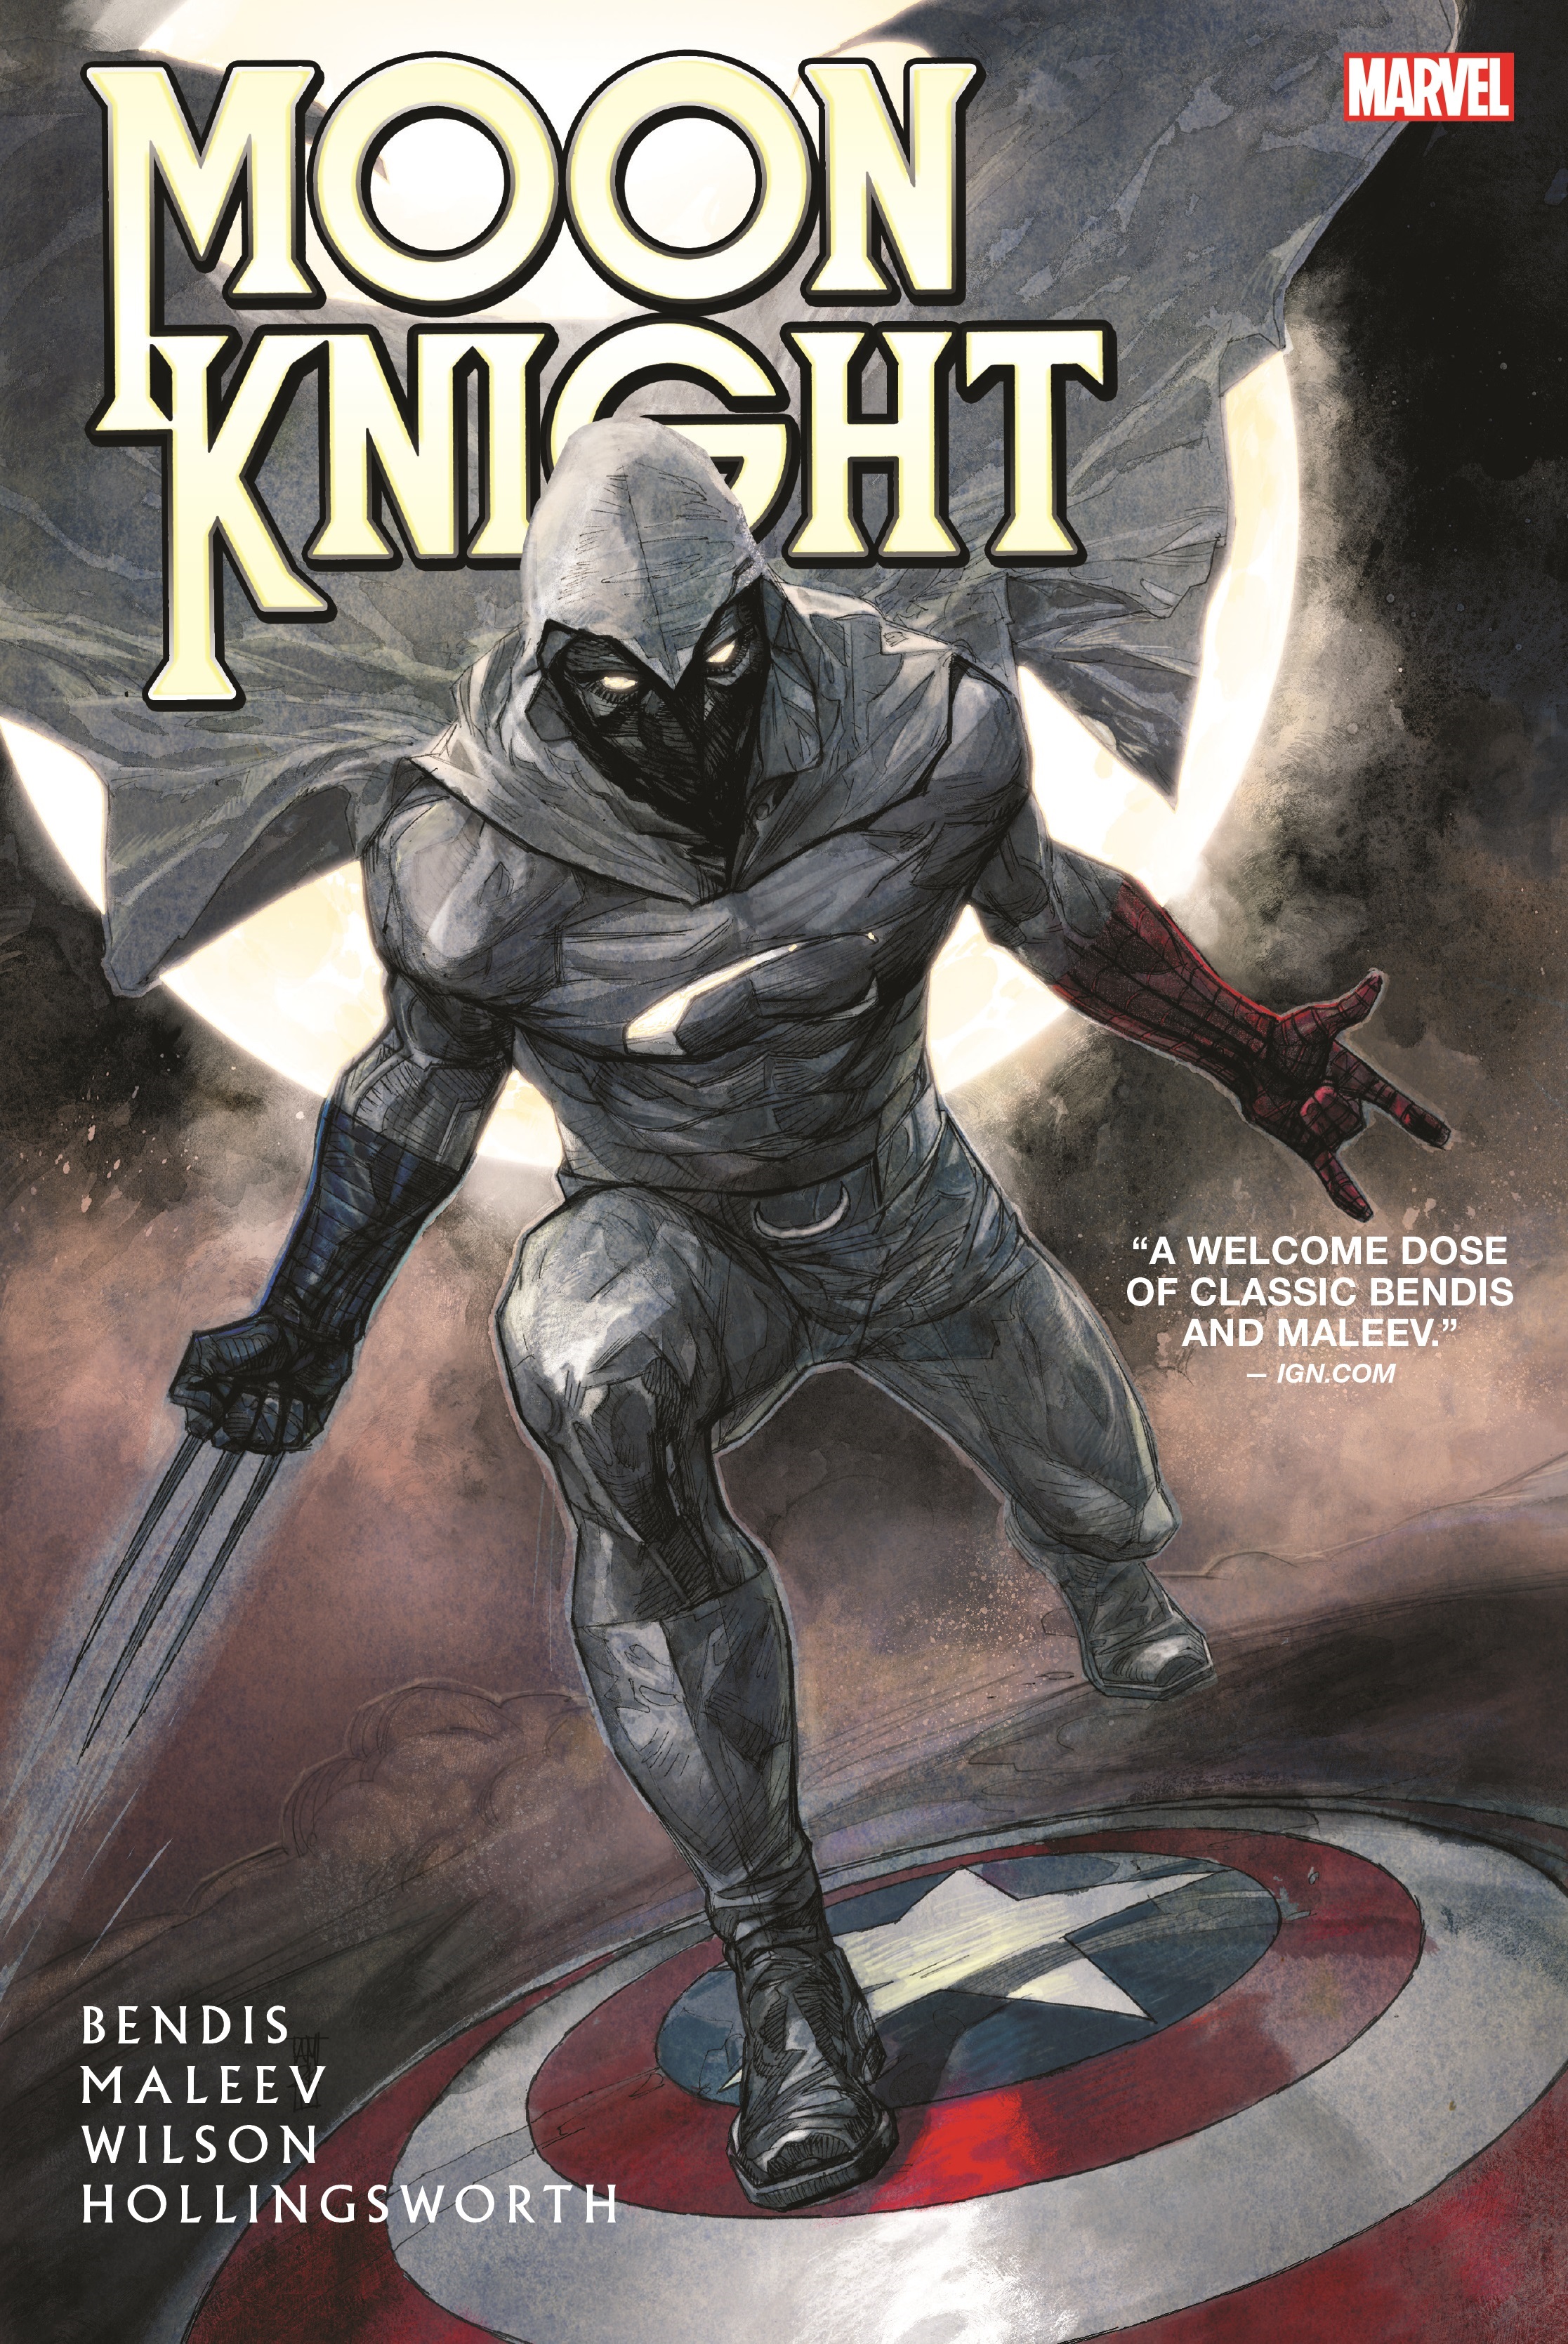 Moon Knight by Brian Michael Bendis & Alex Maleev (Trade Paperback)